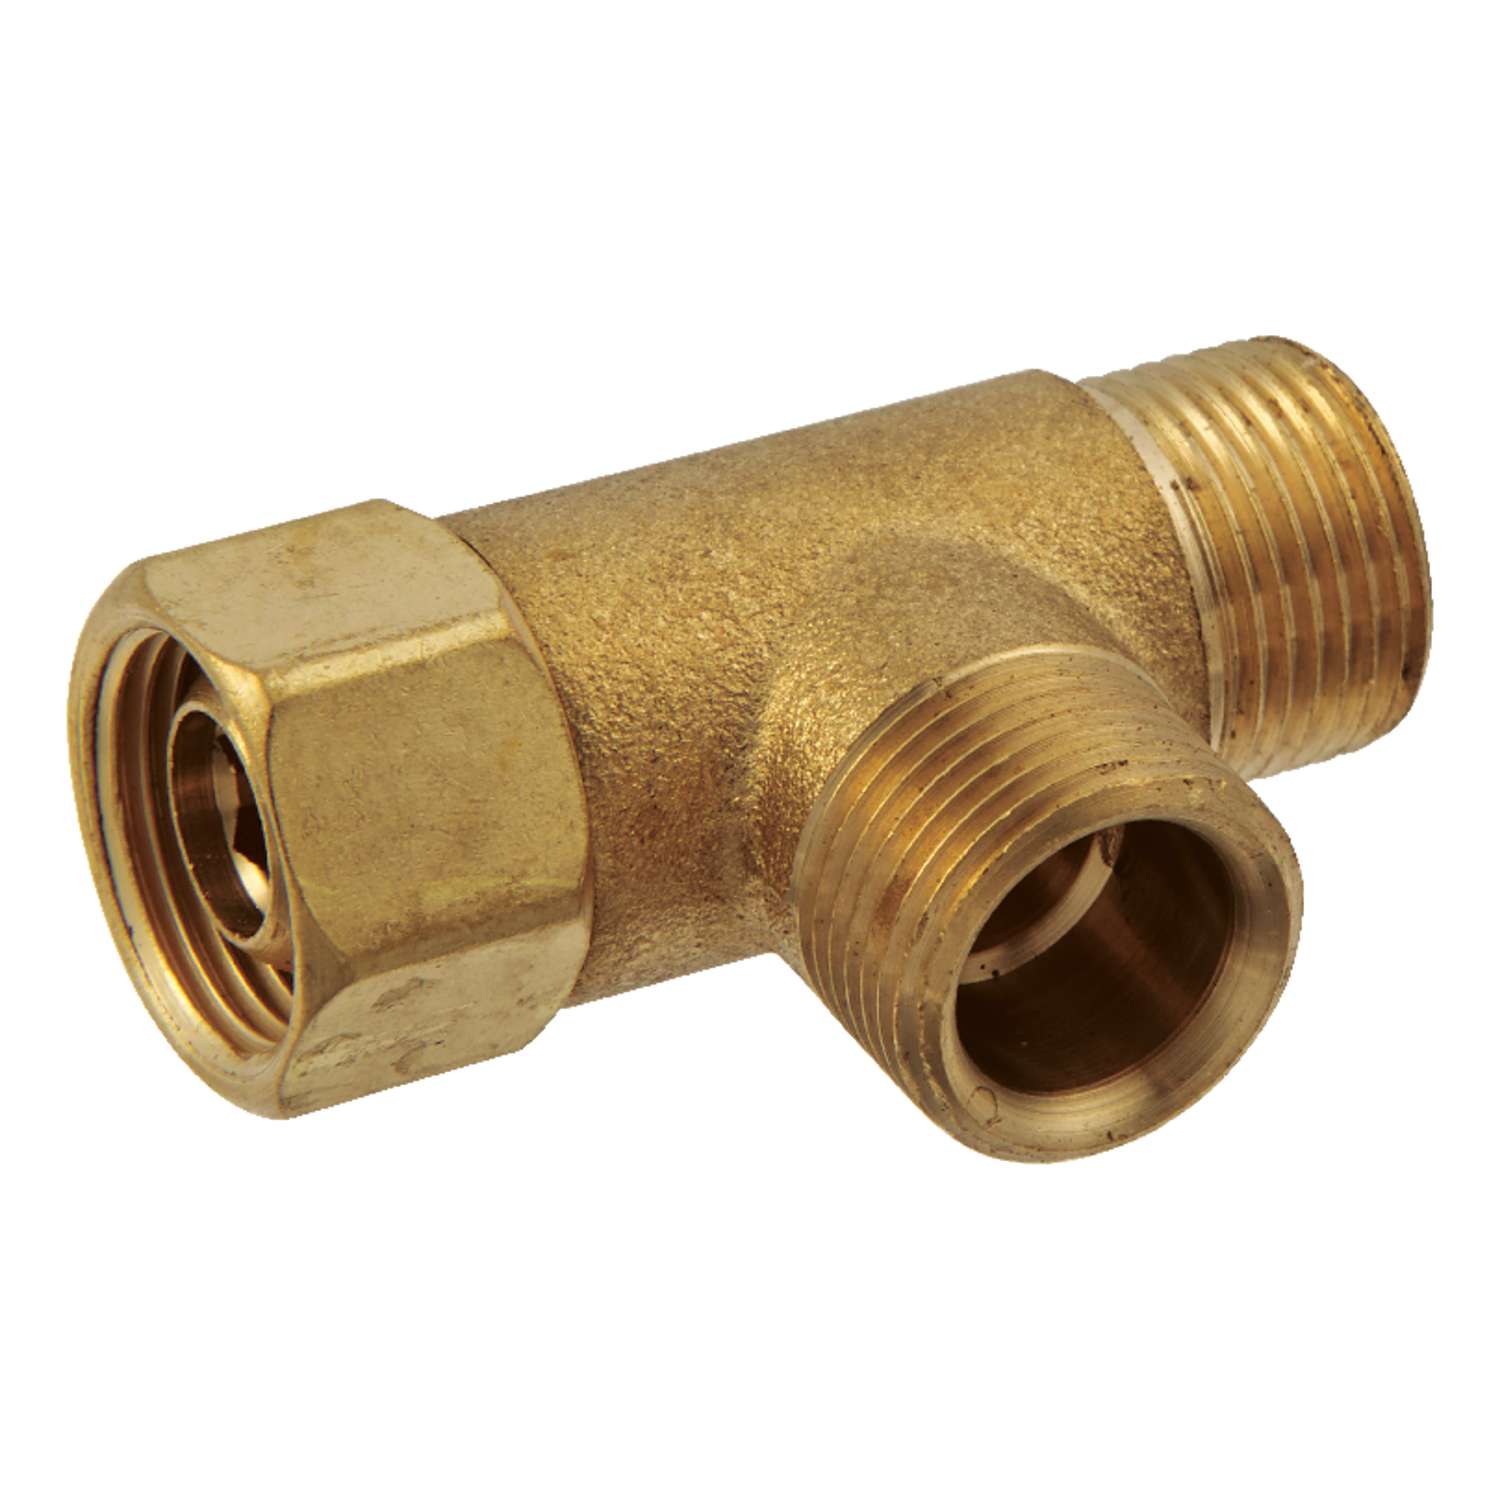 2 PCS 3/8 Compression Tee Fittings Water Line Splitter Angle Stop Add-A-Tee  Valve Lead-Free Brass 3 Way Valve 3/8-Inch Compression Inlet X 3/8-Inch